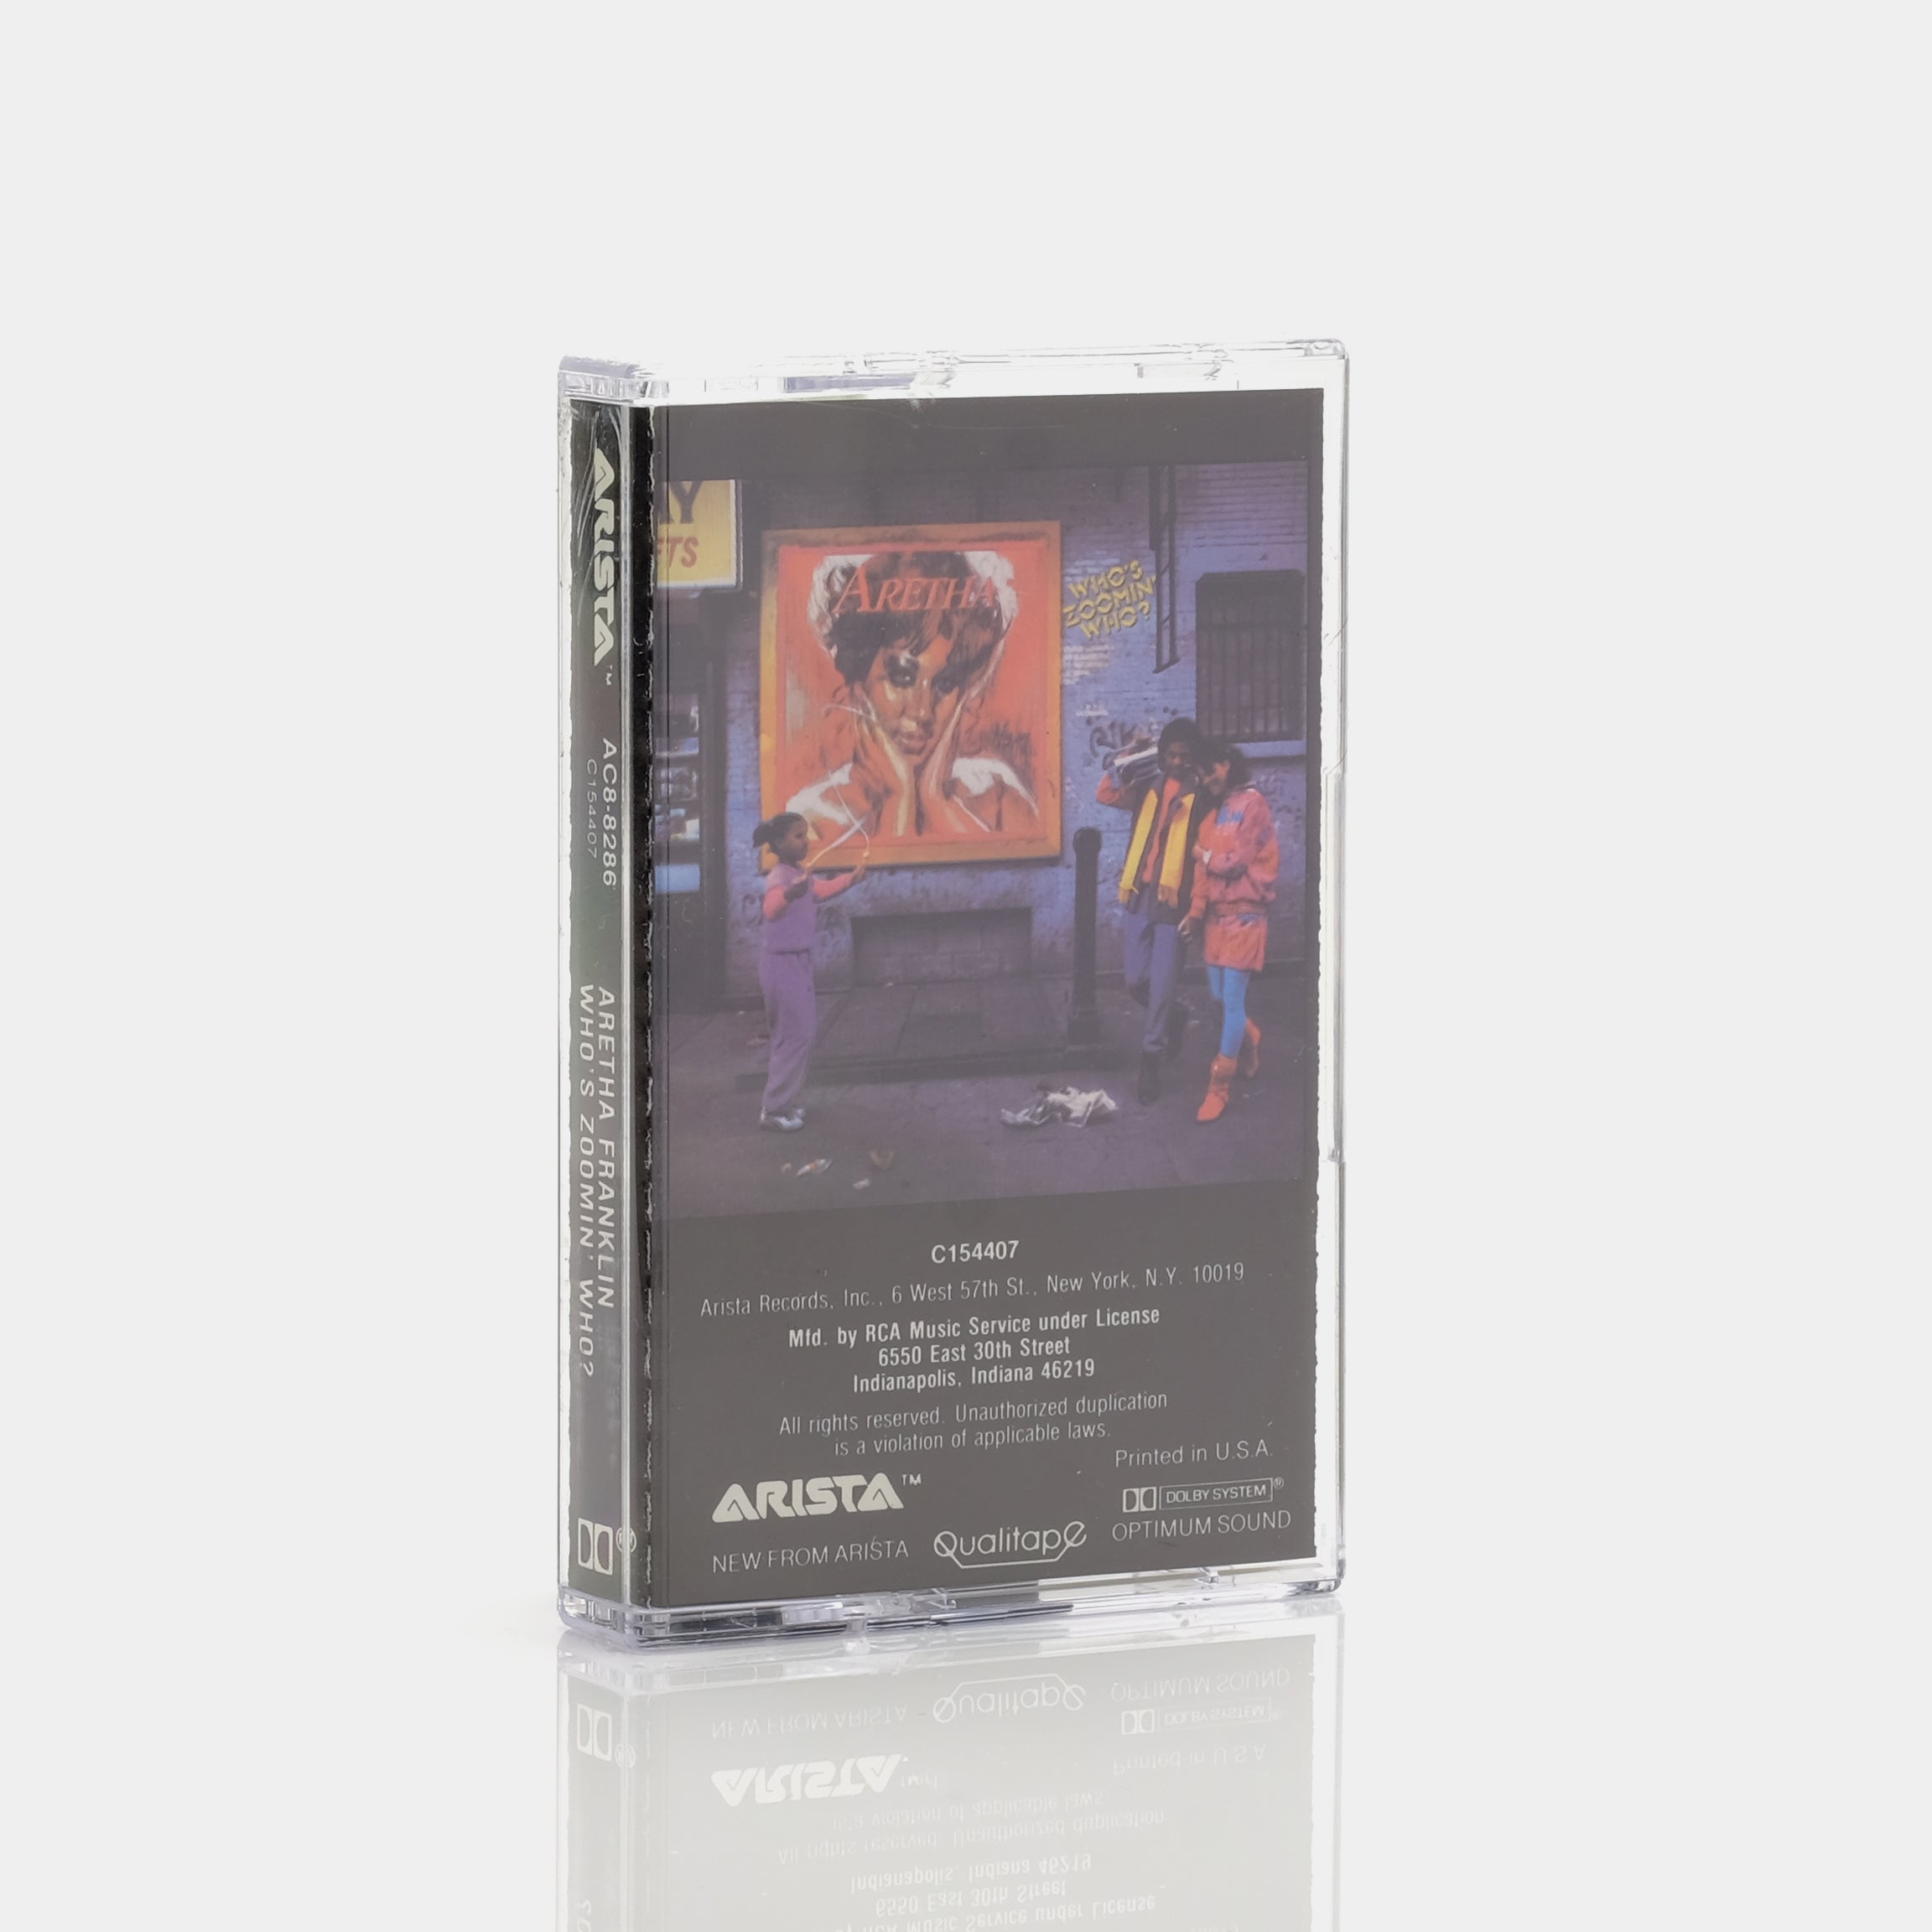 Aretha Franklin - Who's Zoomin' Who? Cassette Tape